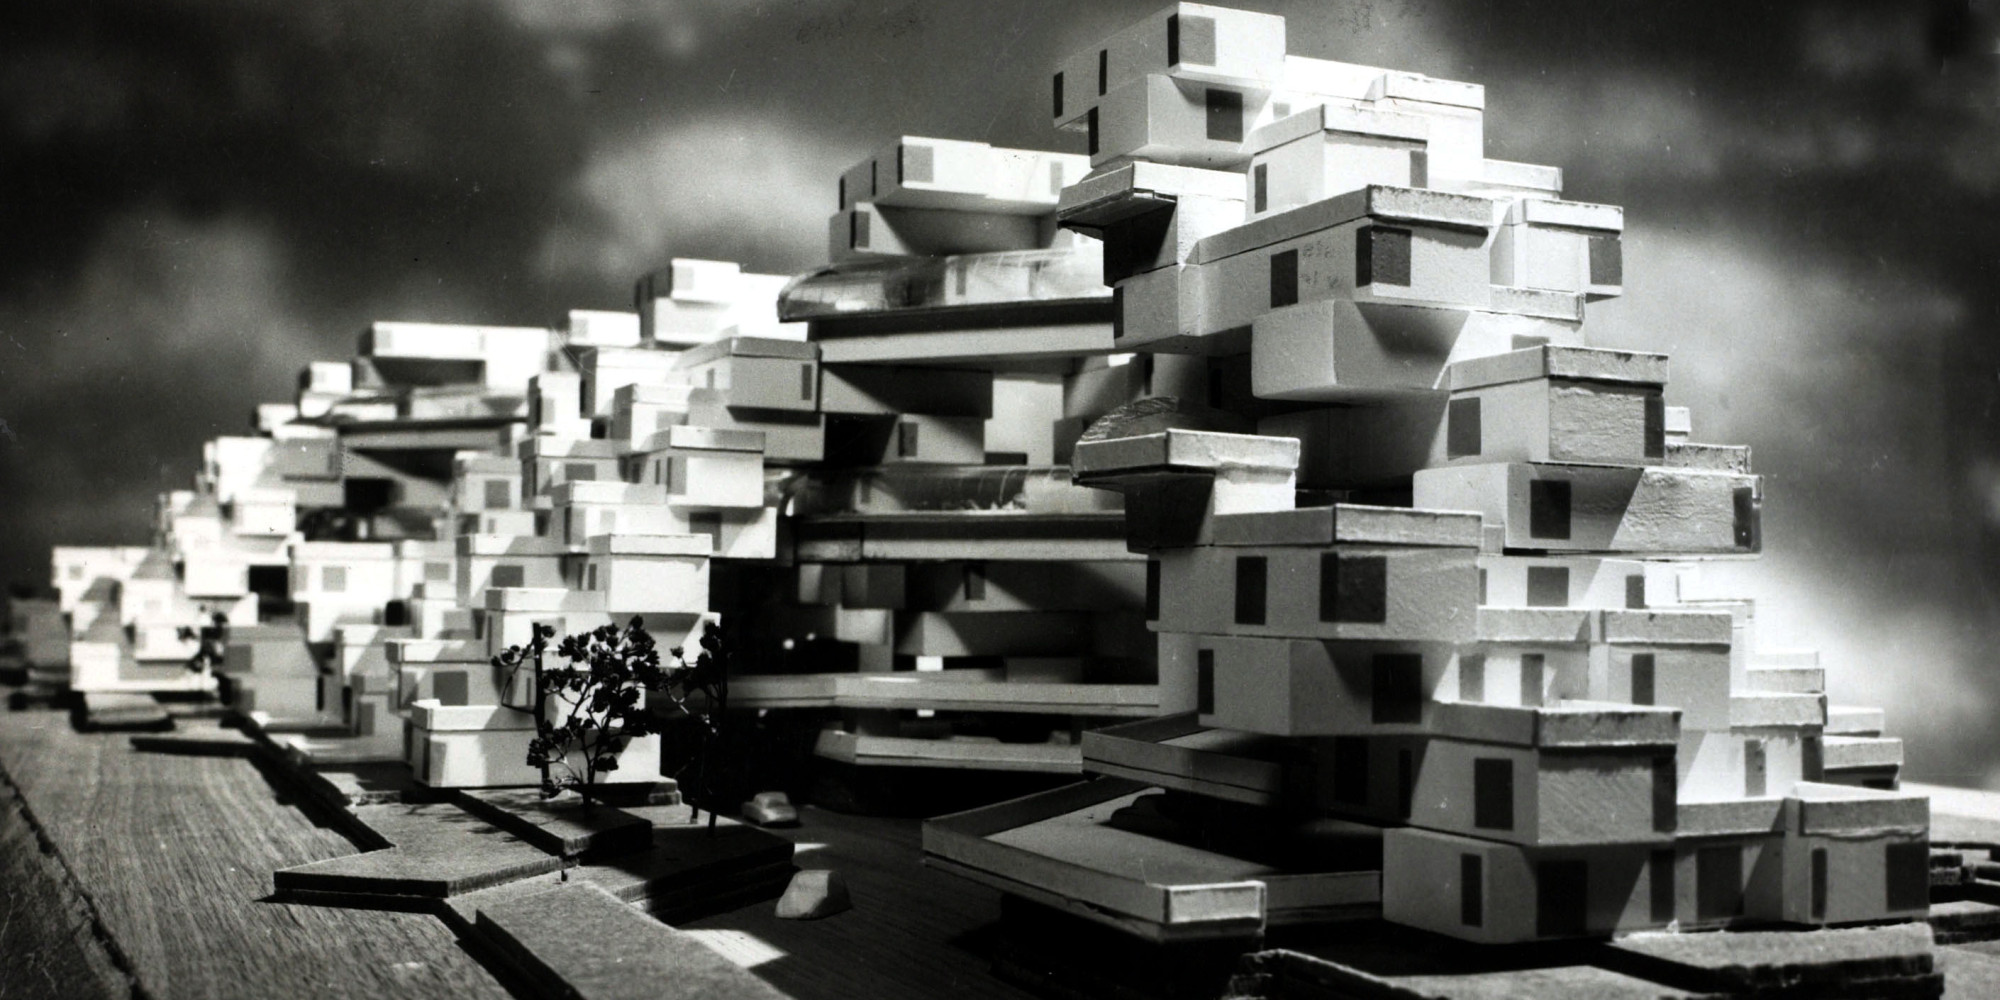 Habitat Israel, 1970, unbuilt. The play is between open and close, but still in the old character of Jerusalem.